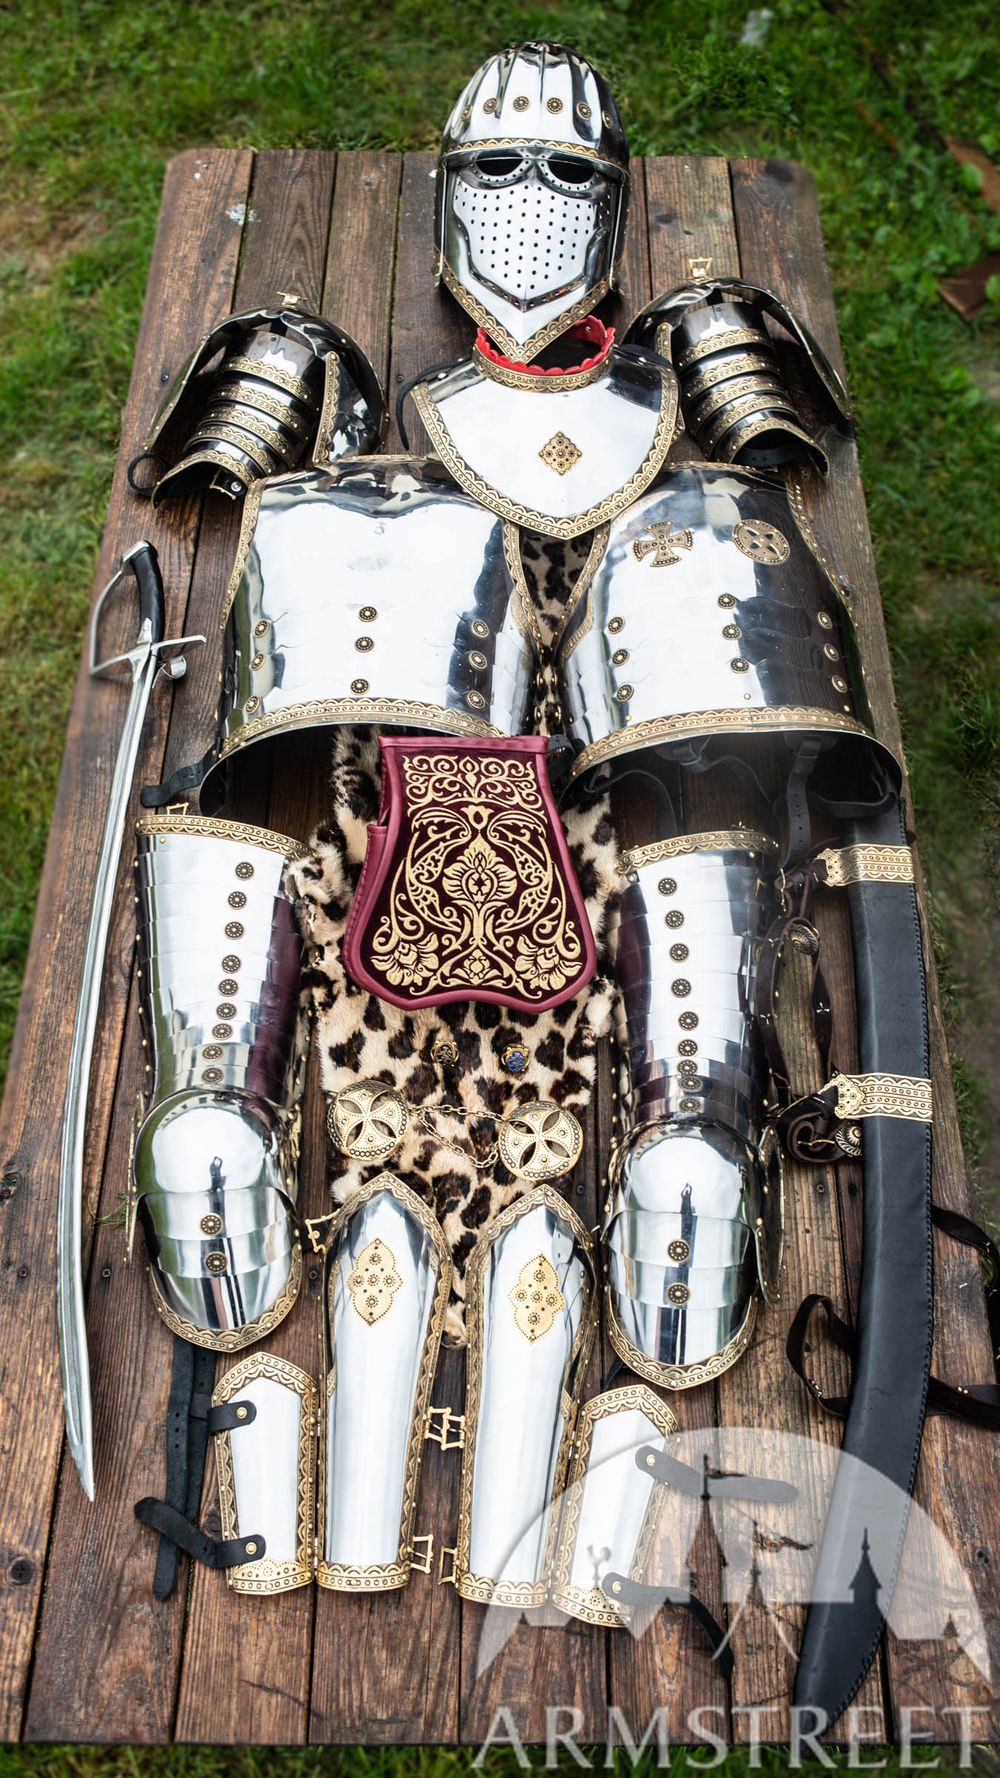 Polish Hussar Stainless Steel with Brass Accents Full Armor Set